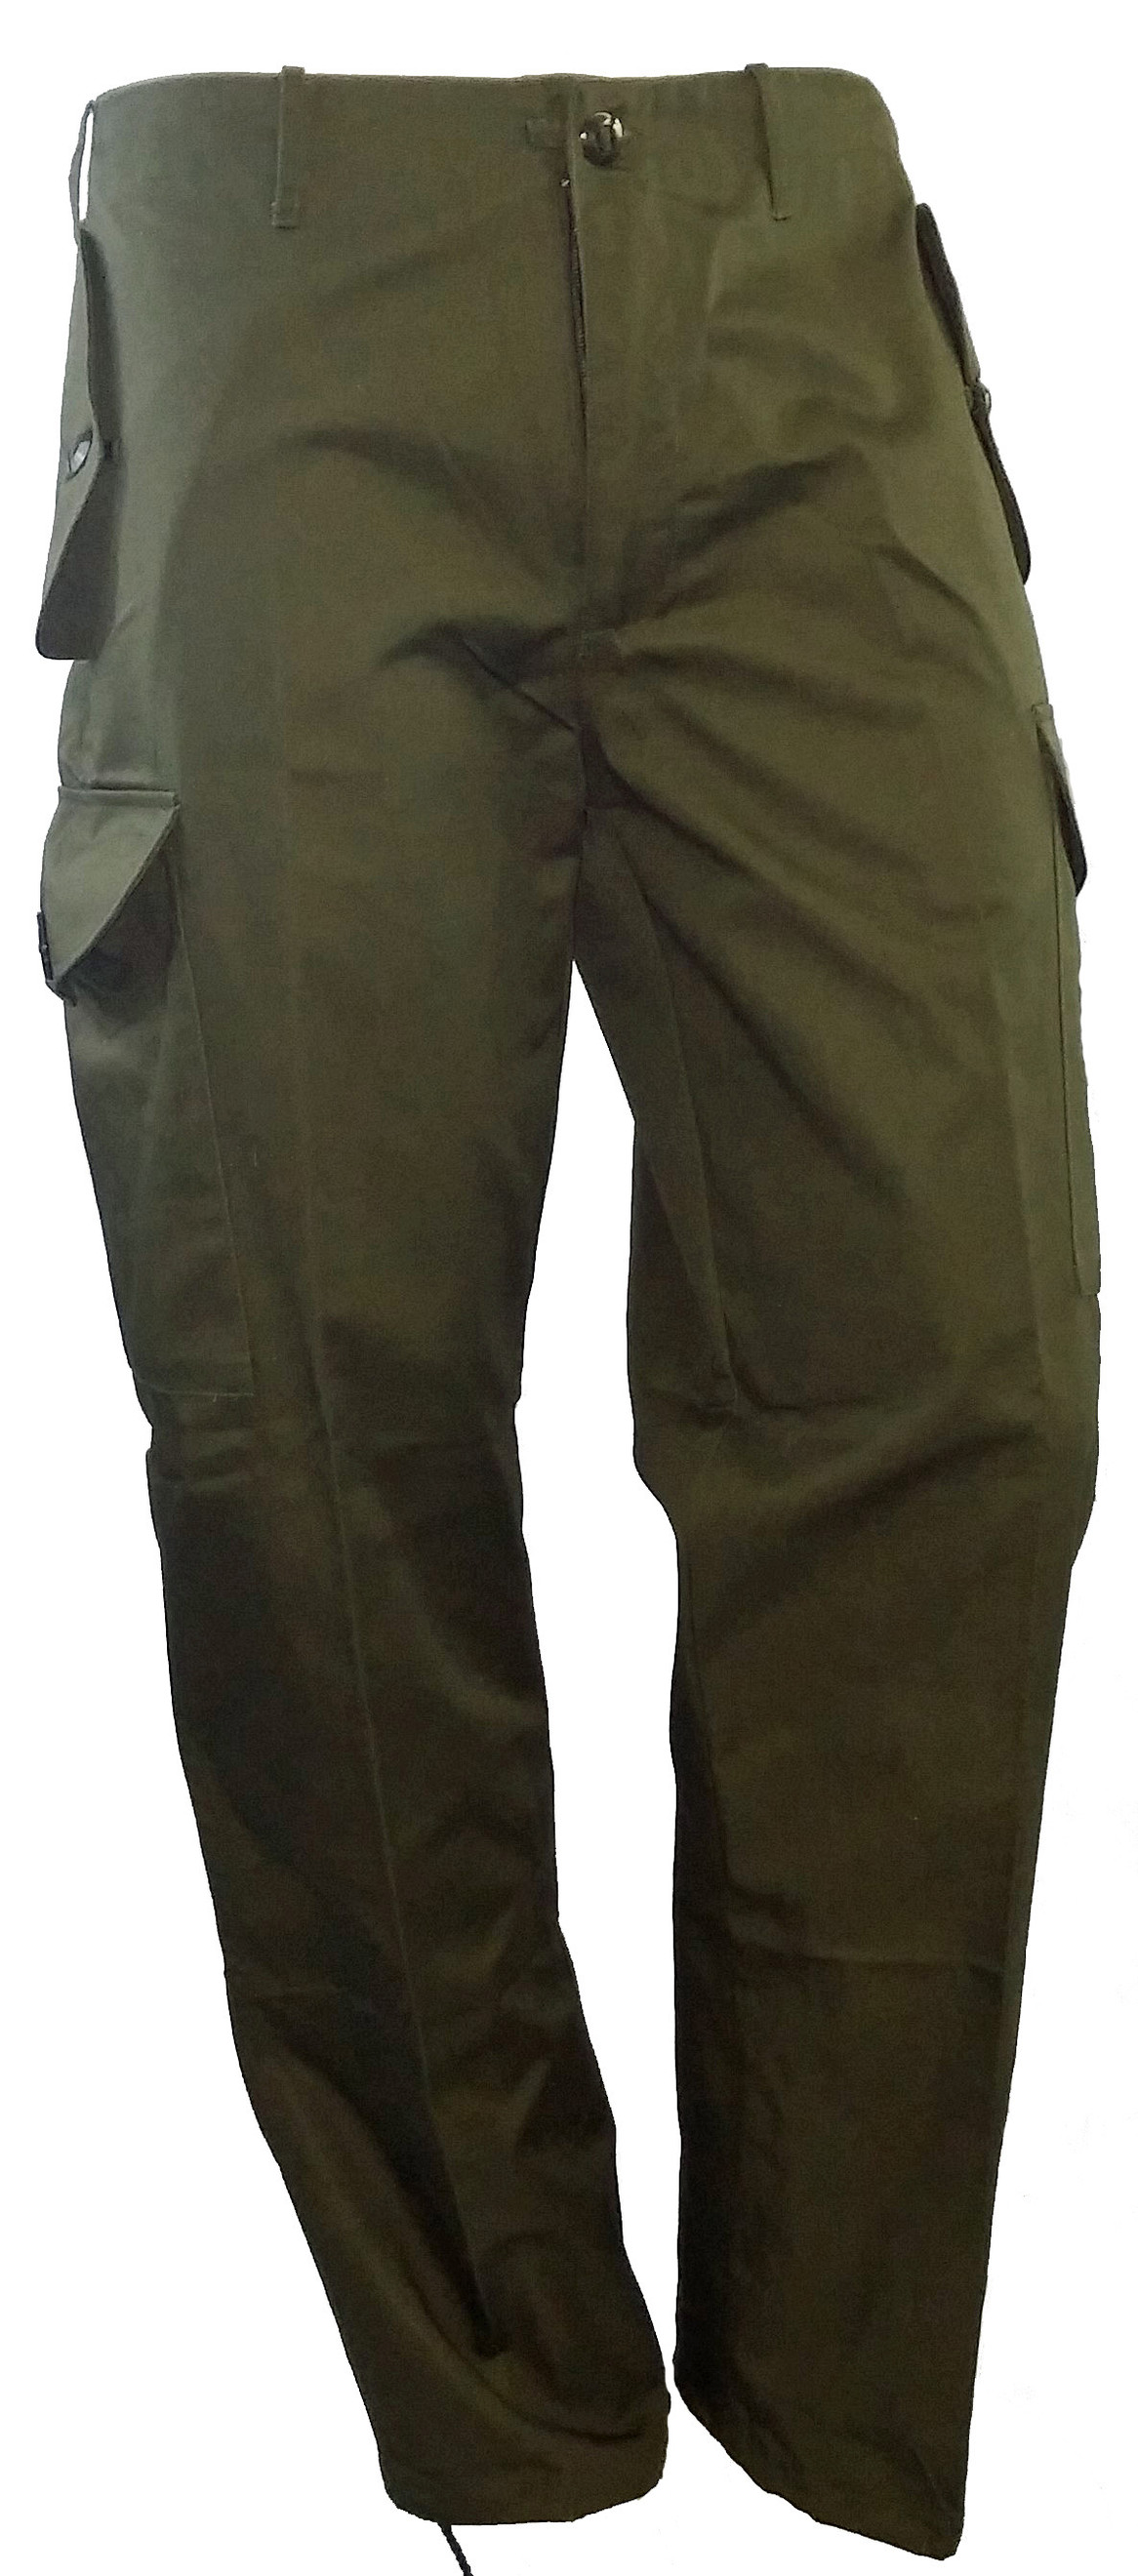 Canadian Armed Forces Style Combat Pants - OD Green